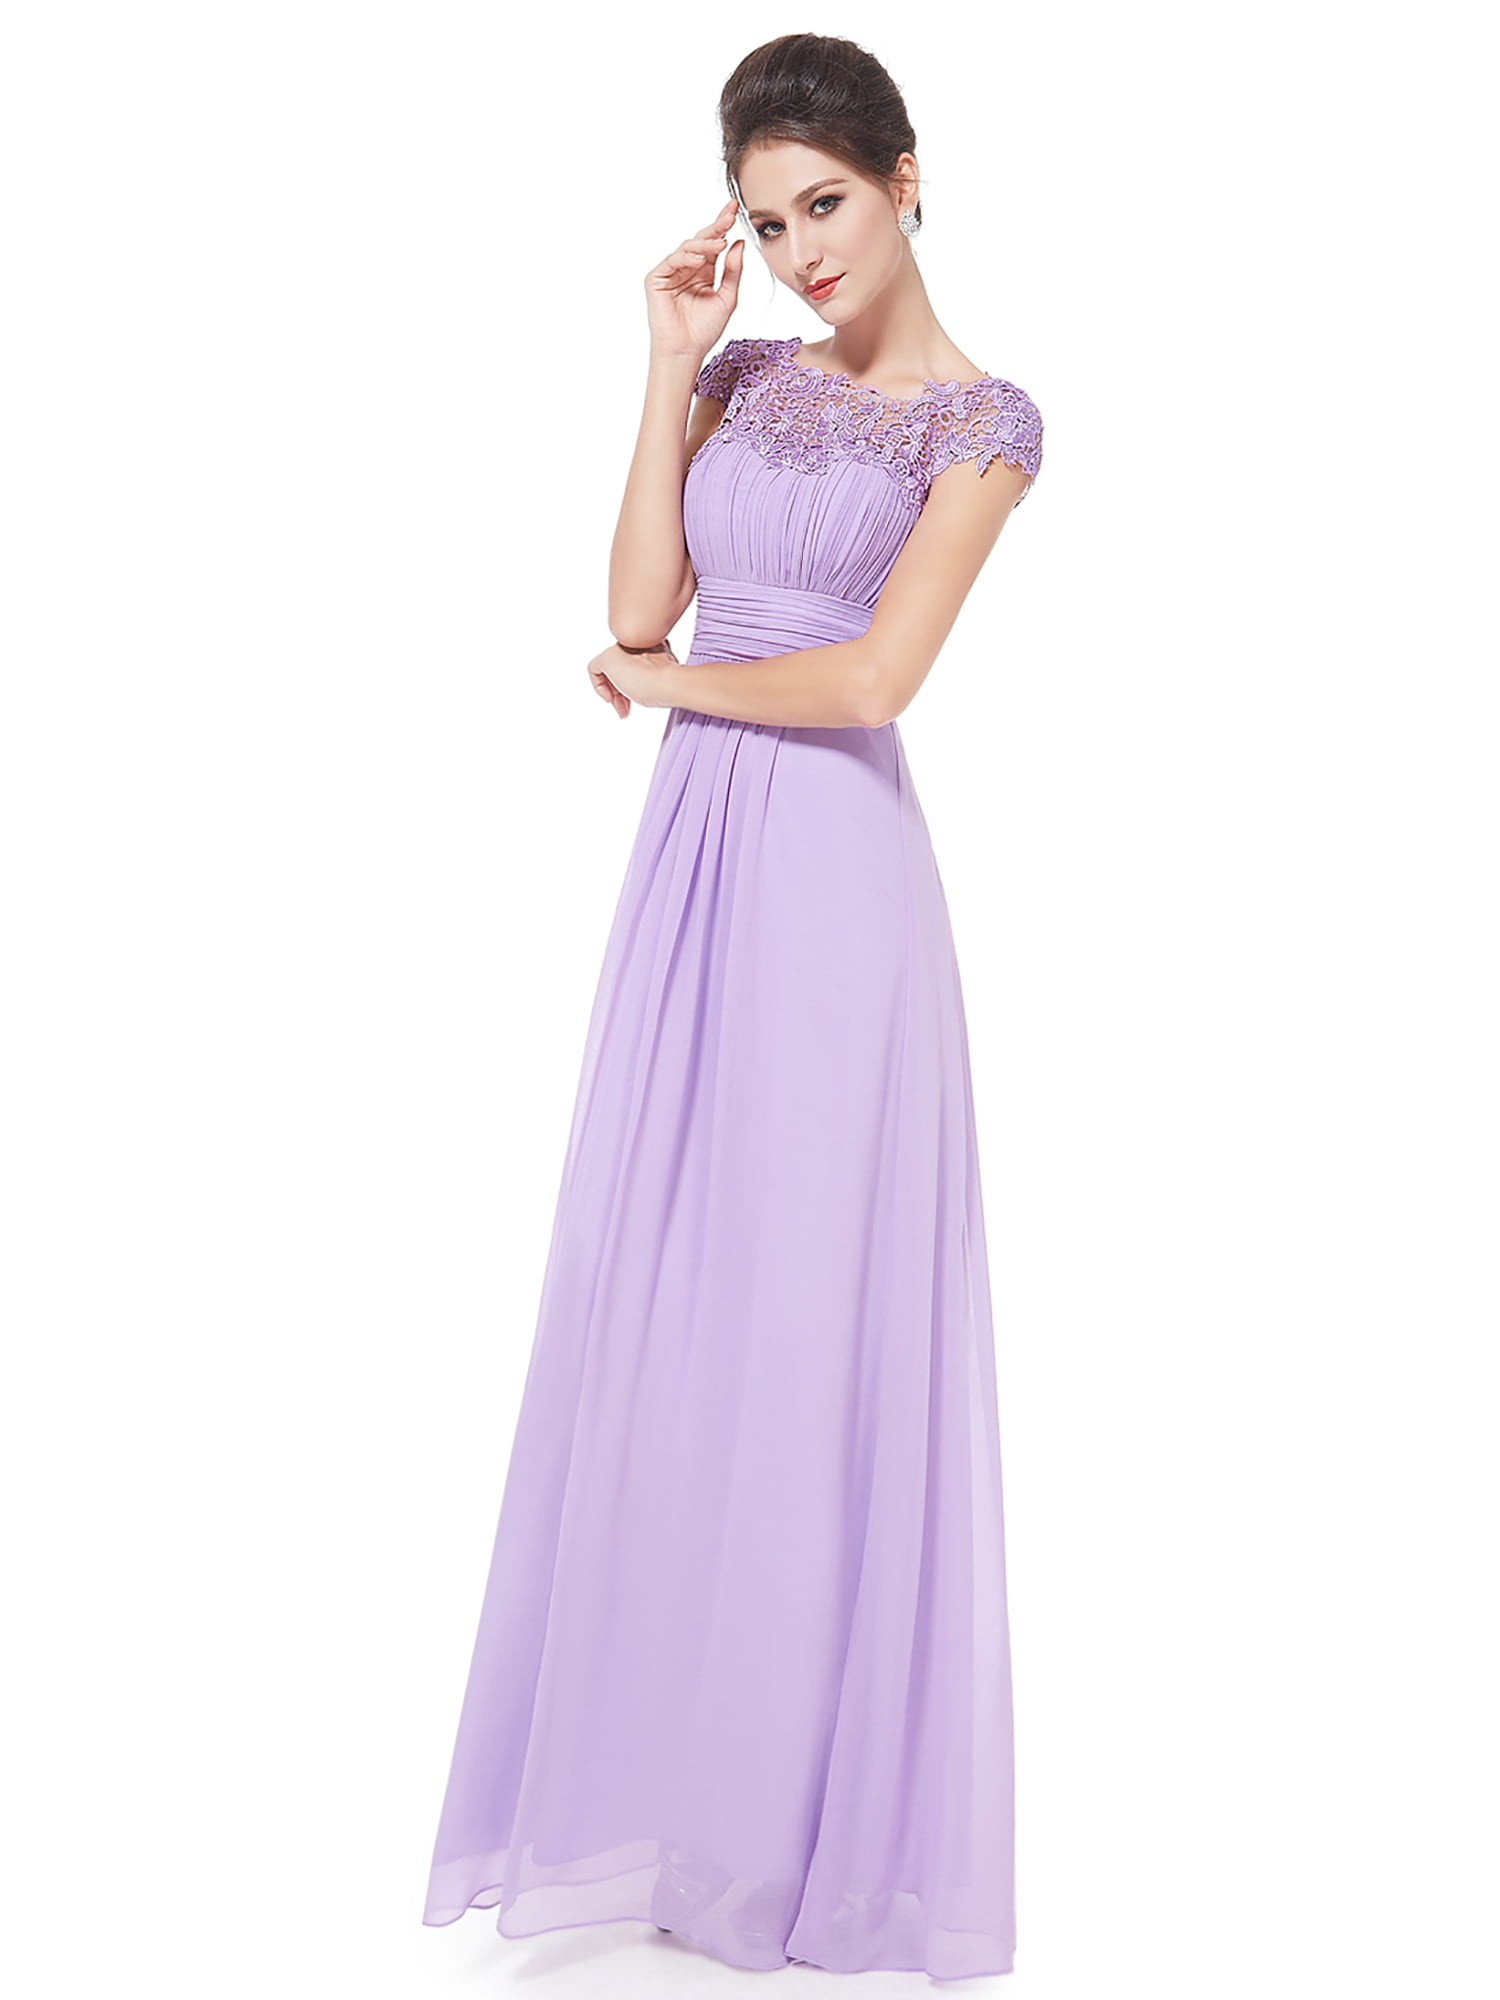 Ever-Pretty Formal Long Chiffon Lavender Holiday Gowns Bridesmaid Dresses 09993